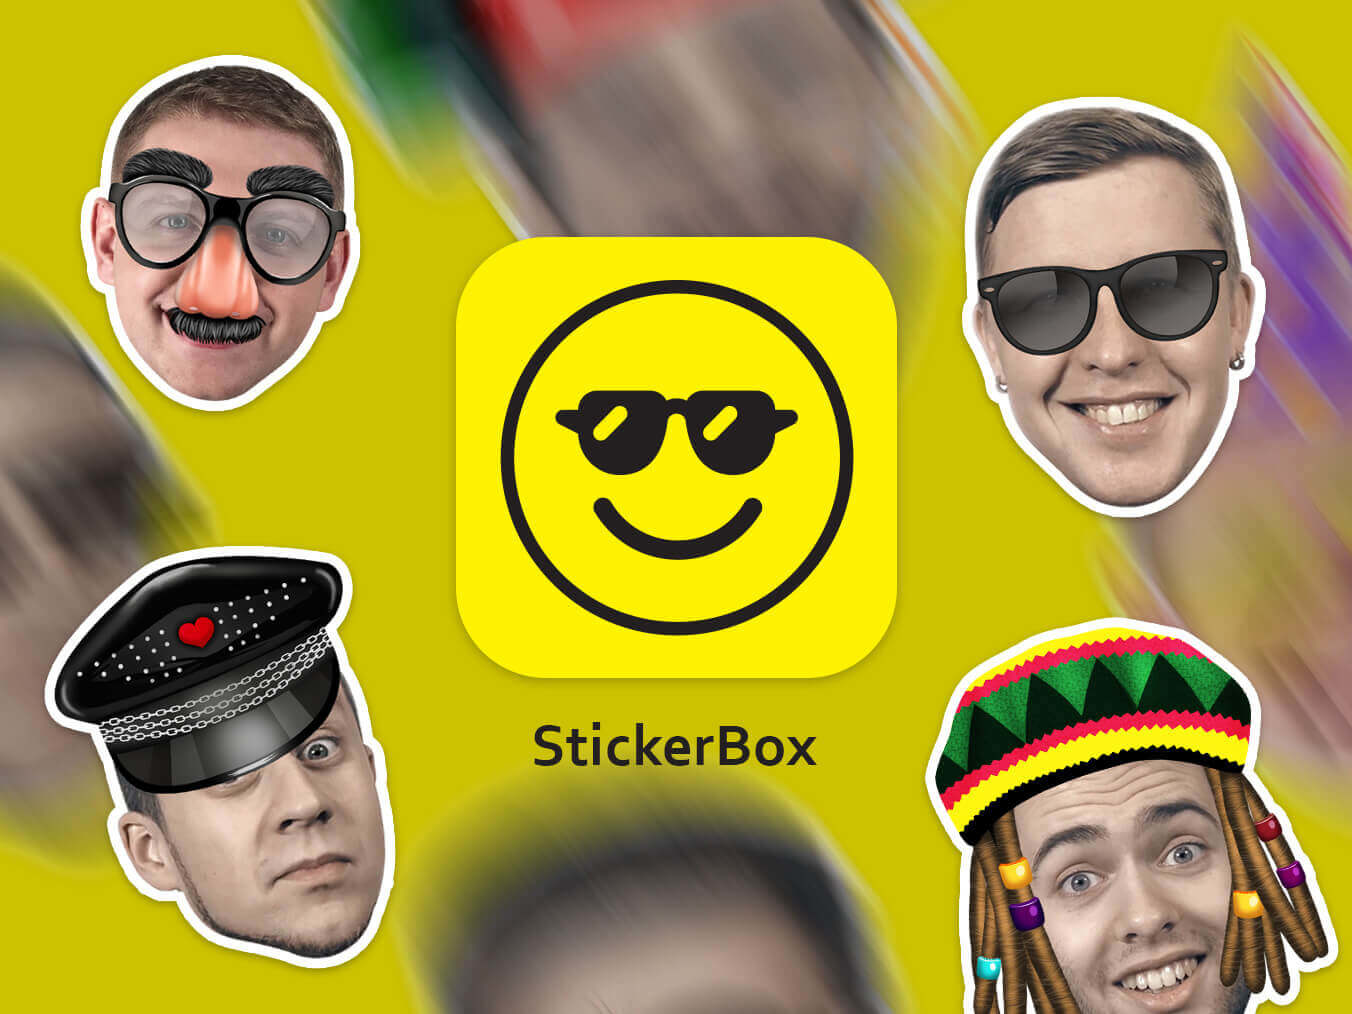 StickerBox–Episode 1: Why We Failed When We Tried to Segment Faces With Algorithms